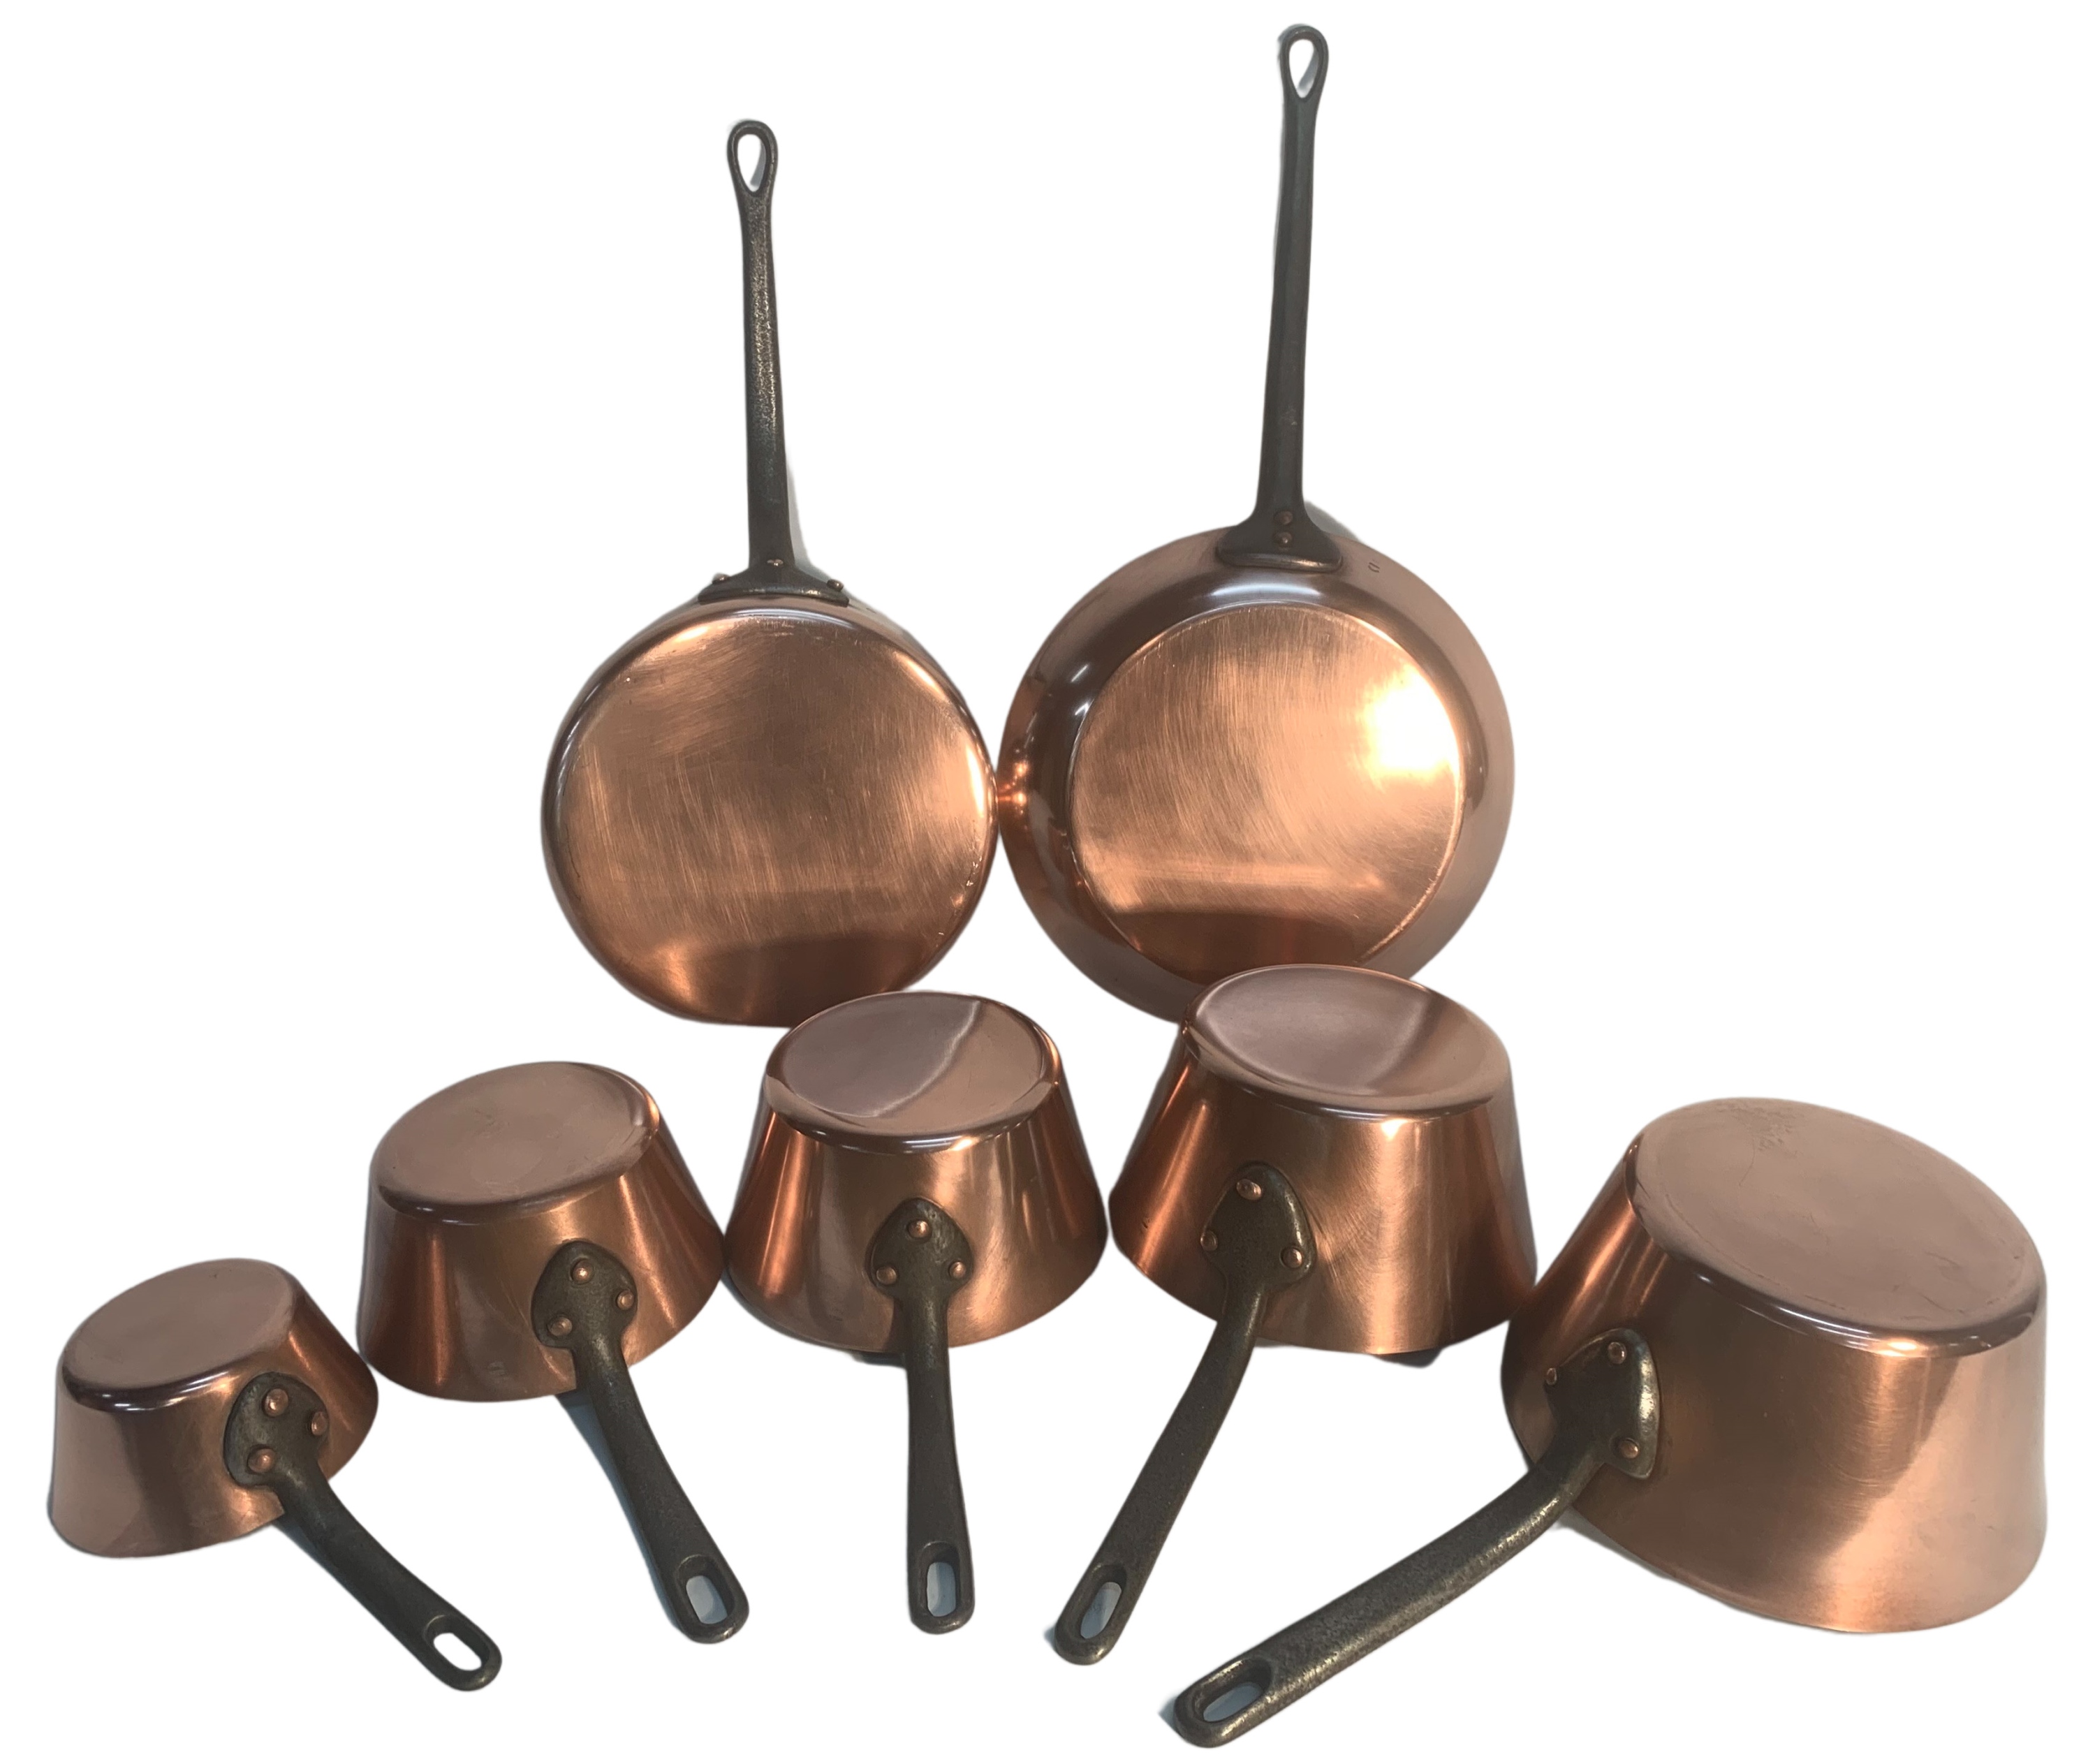 7 FRENCH COPPER CULINARY PANS Group 2f8c42